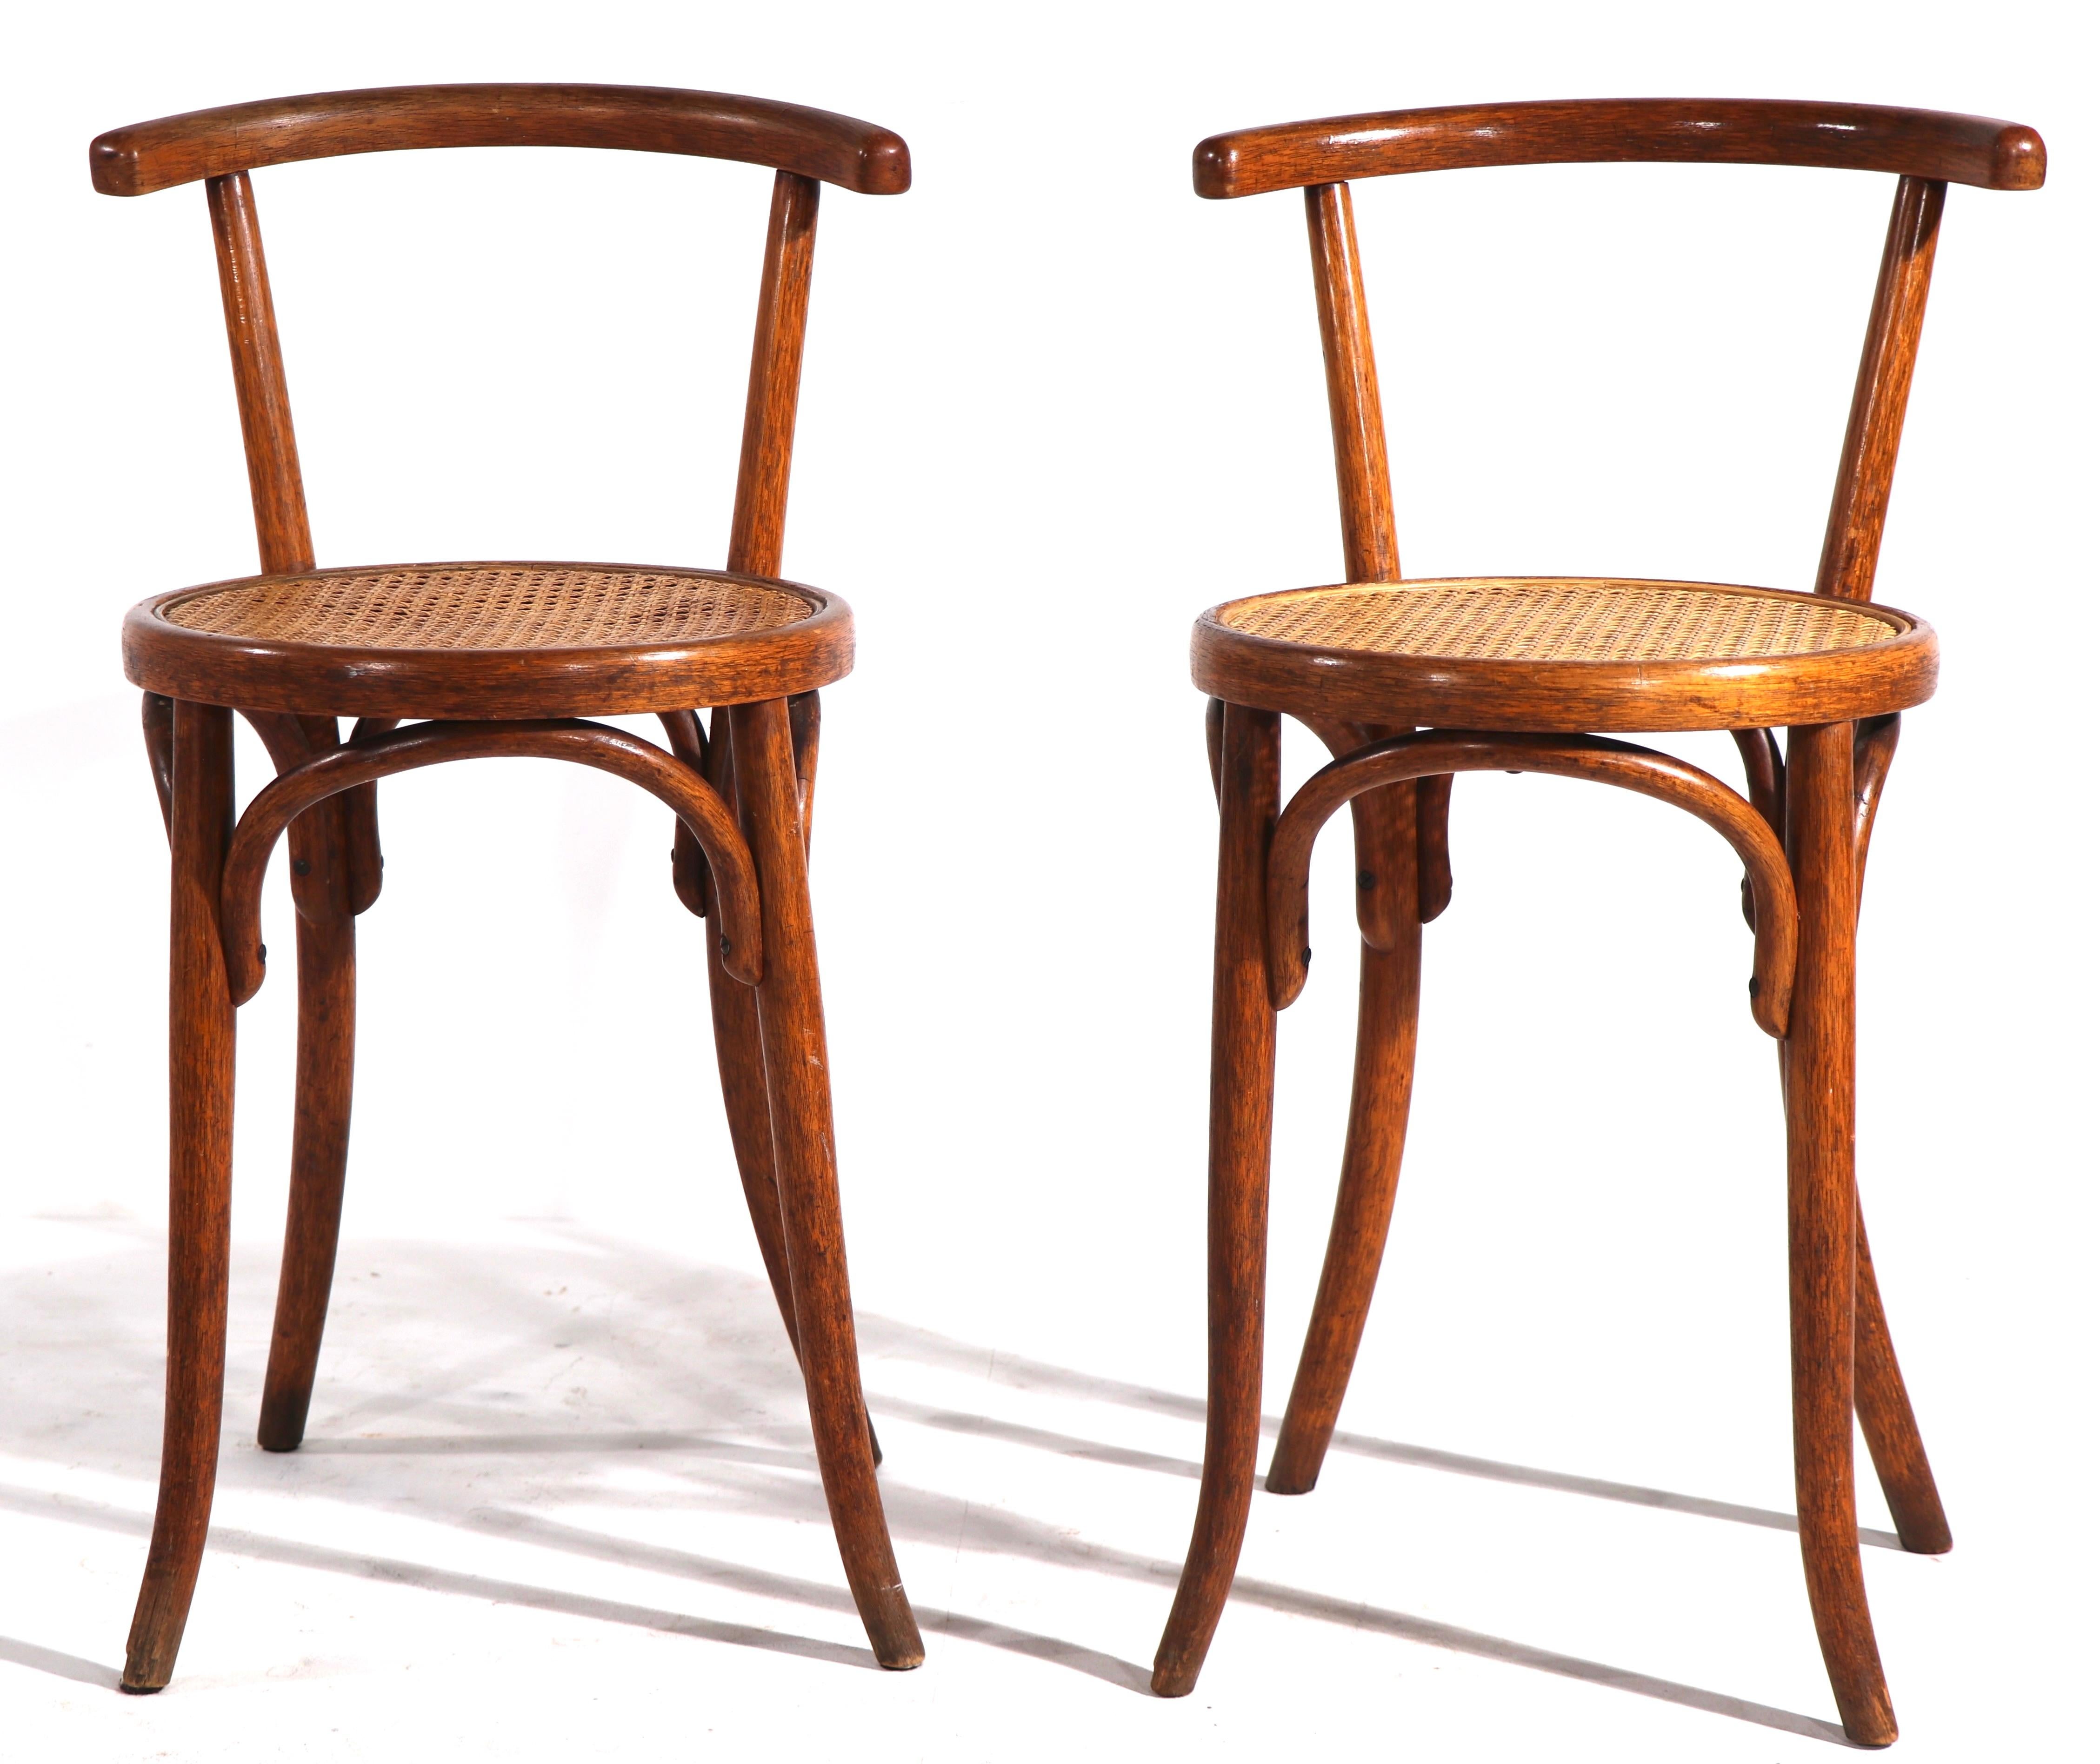 Sophisticated pair of bentwood chairs made in Czechoslovakia by noted maker Fischel. The chairs feature bentwood frames, with caned seats. Both chairs are in clean, ready to use condition. Offered and priced as a pair.